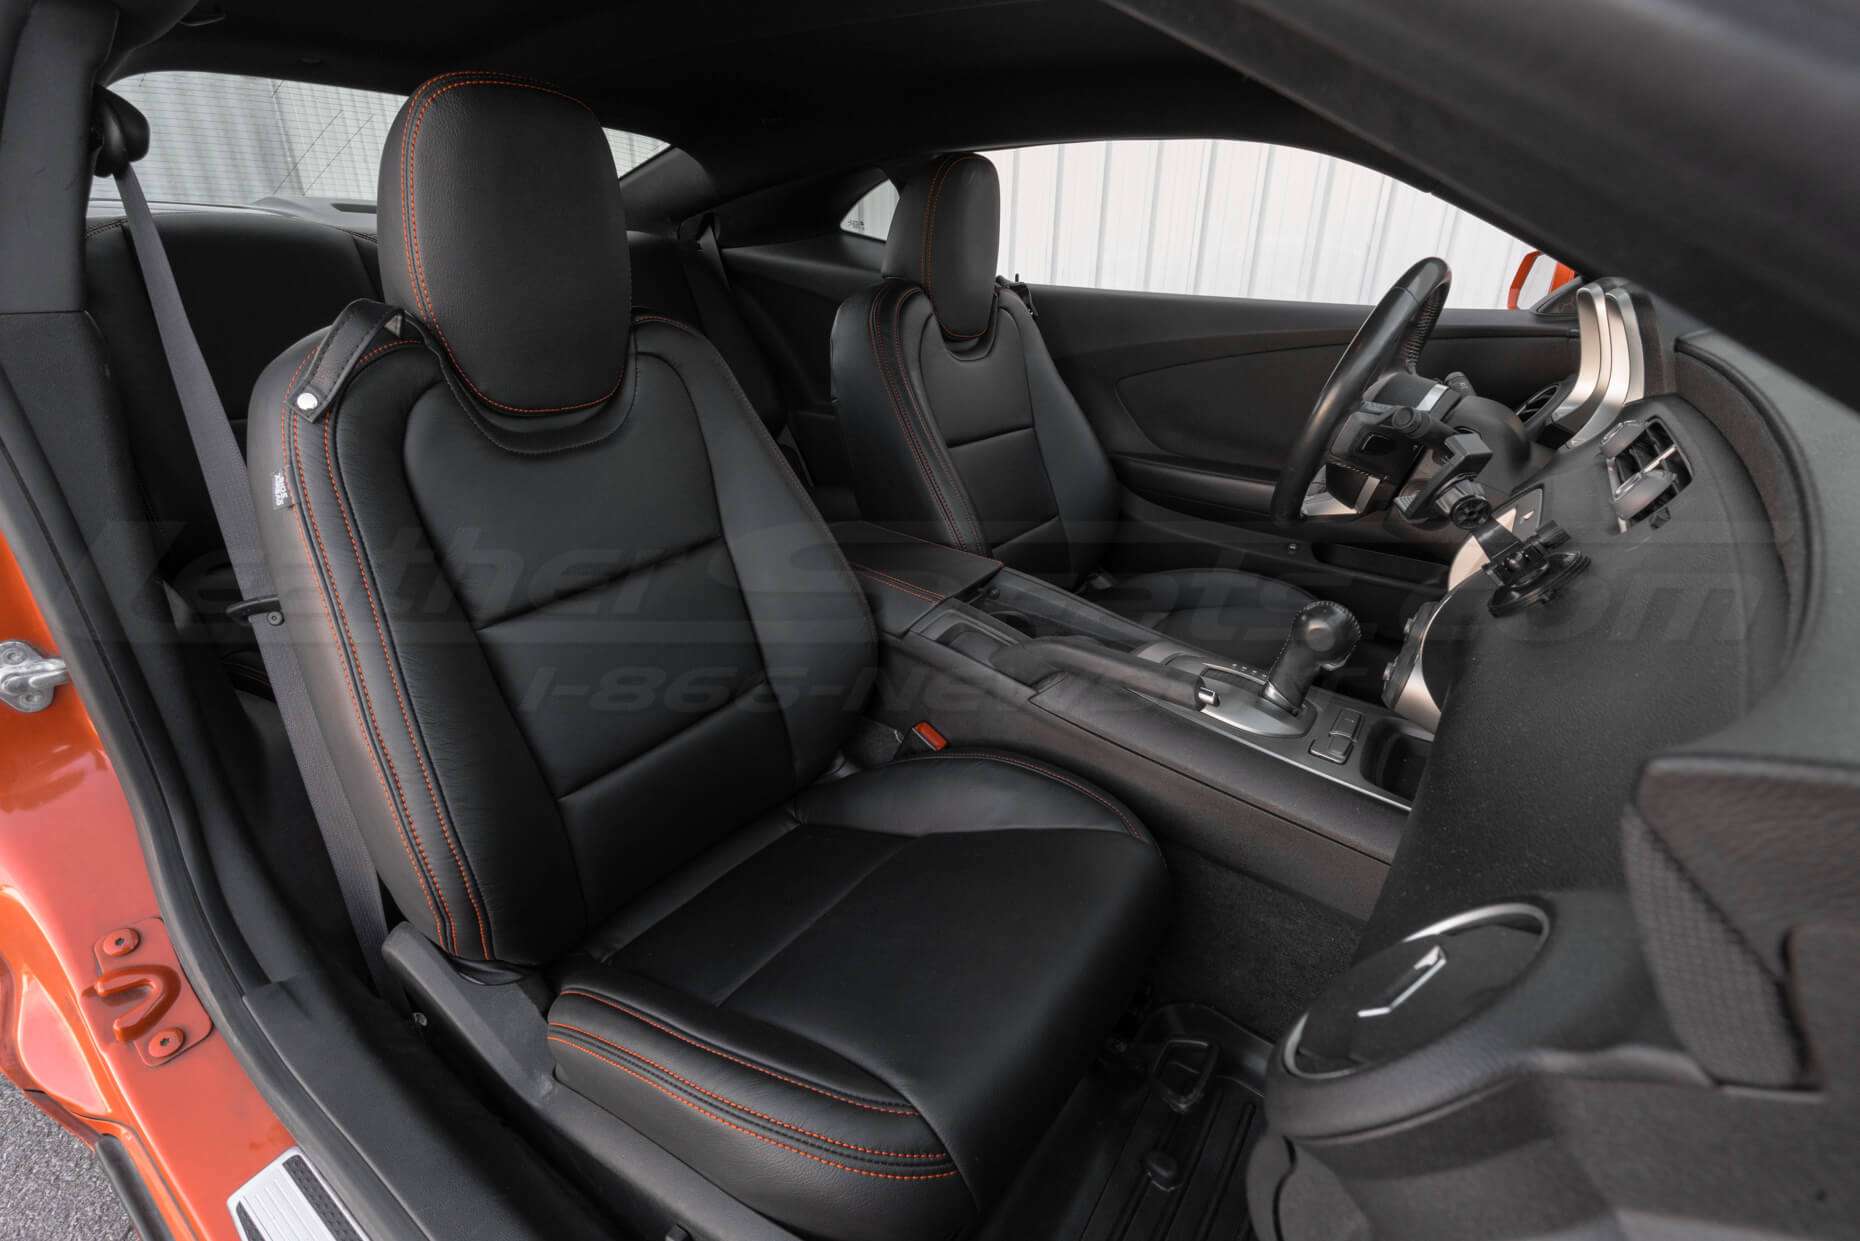 Chevrolet Camaro installed leather seats - Black - Front seats from Passenger side